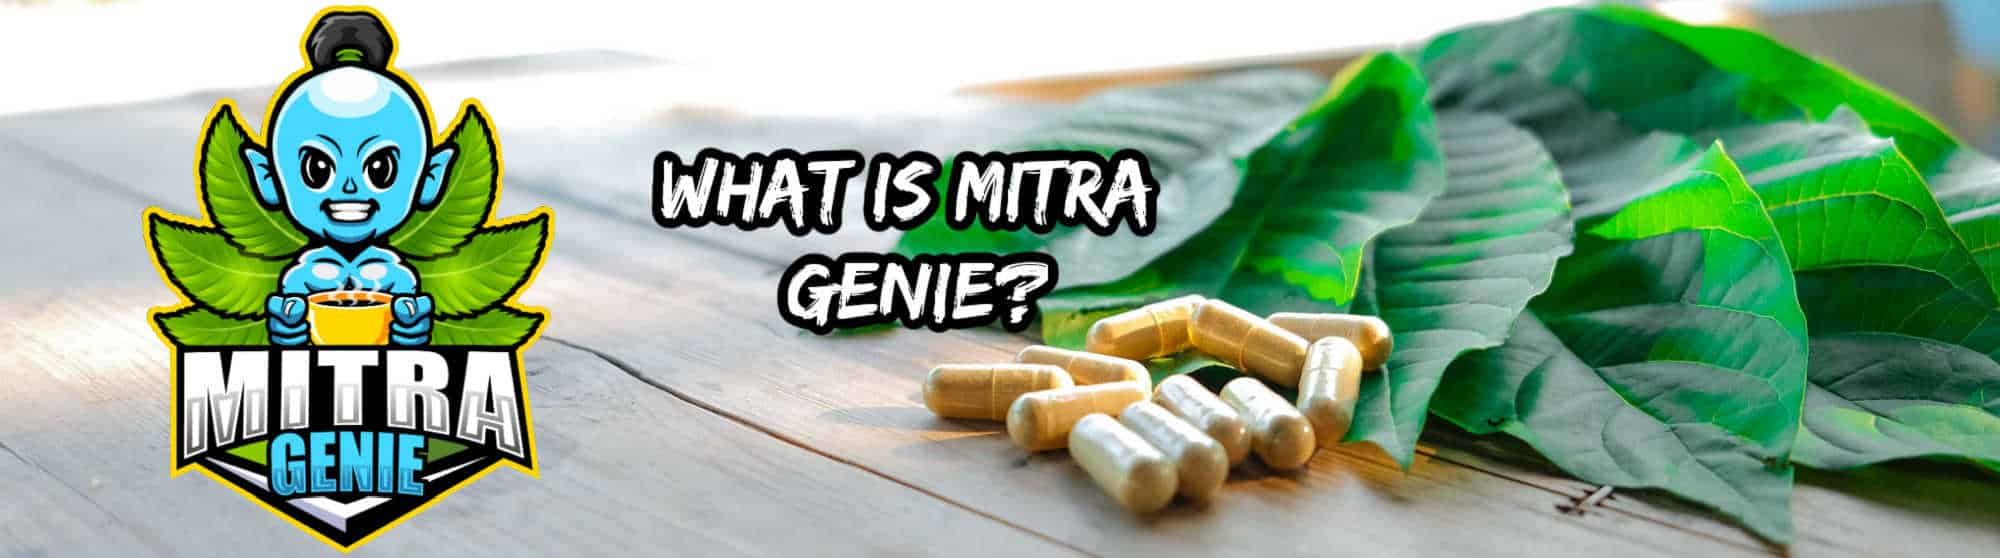 image of what is mitra genie